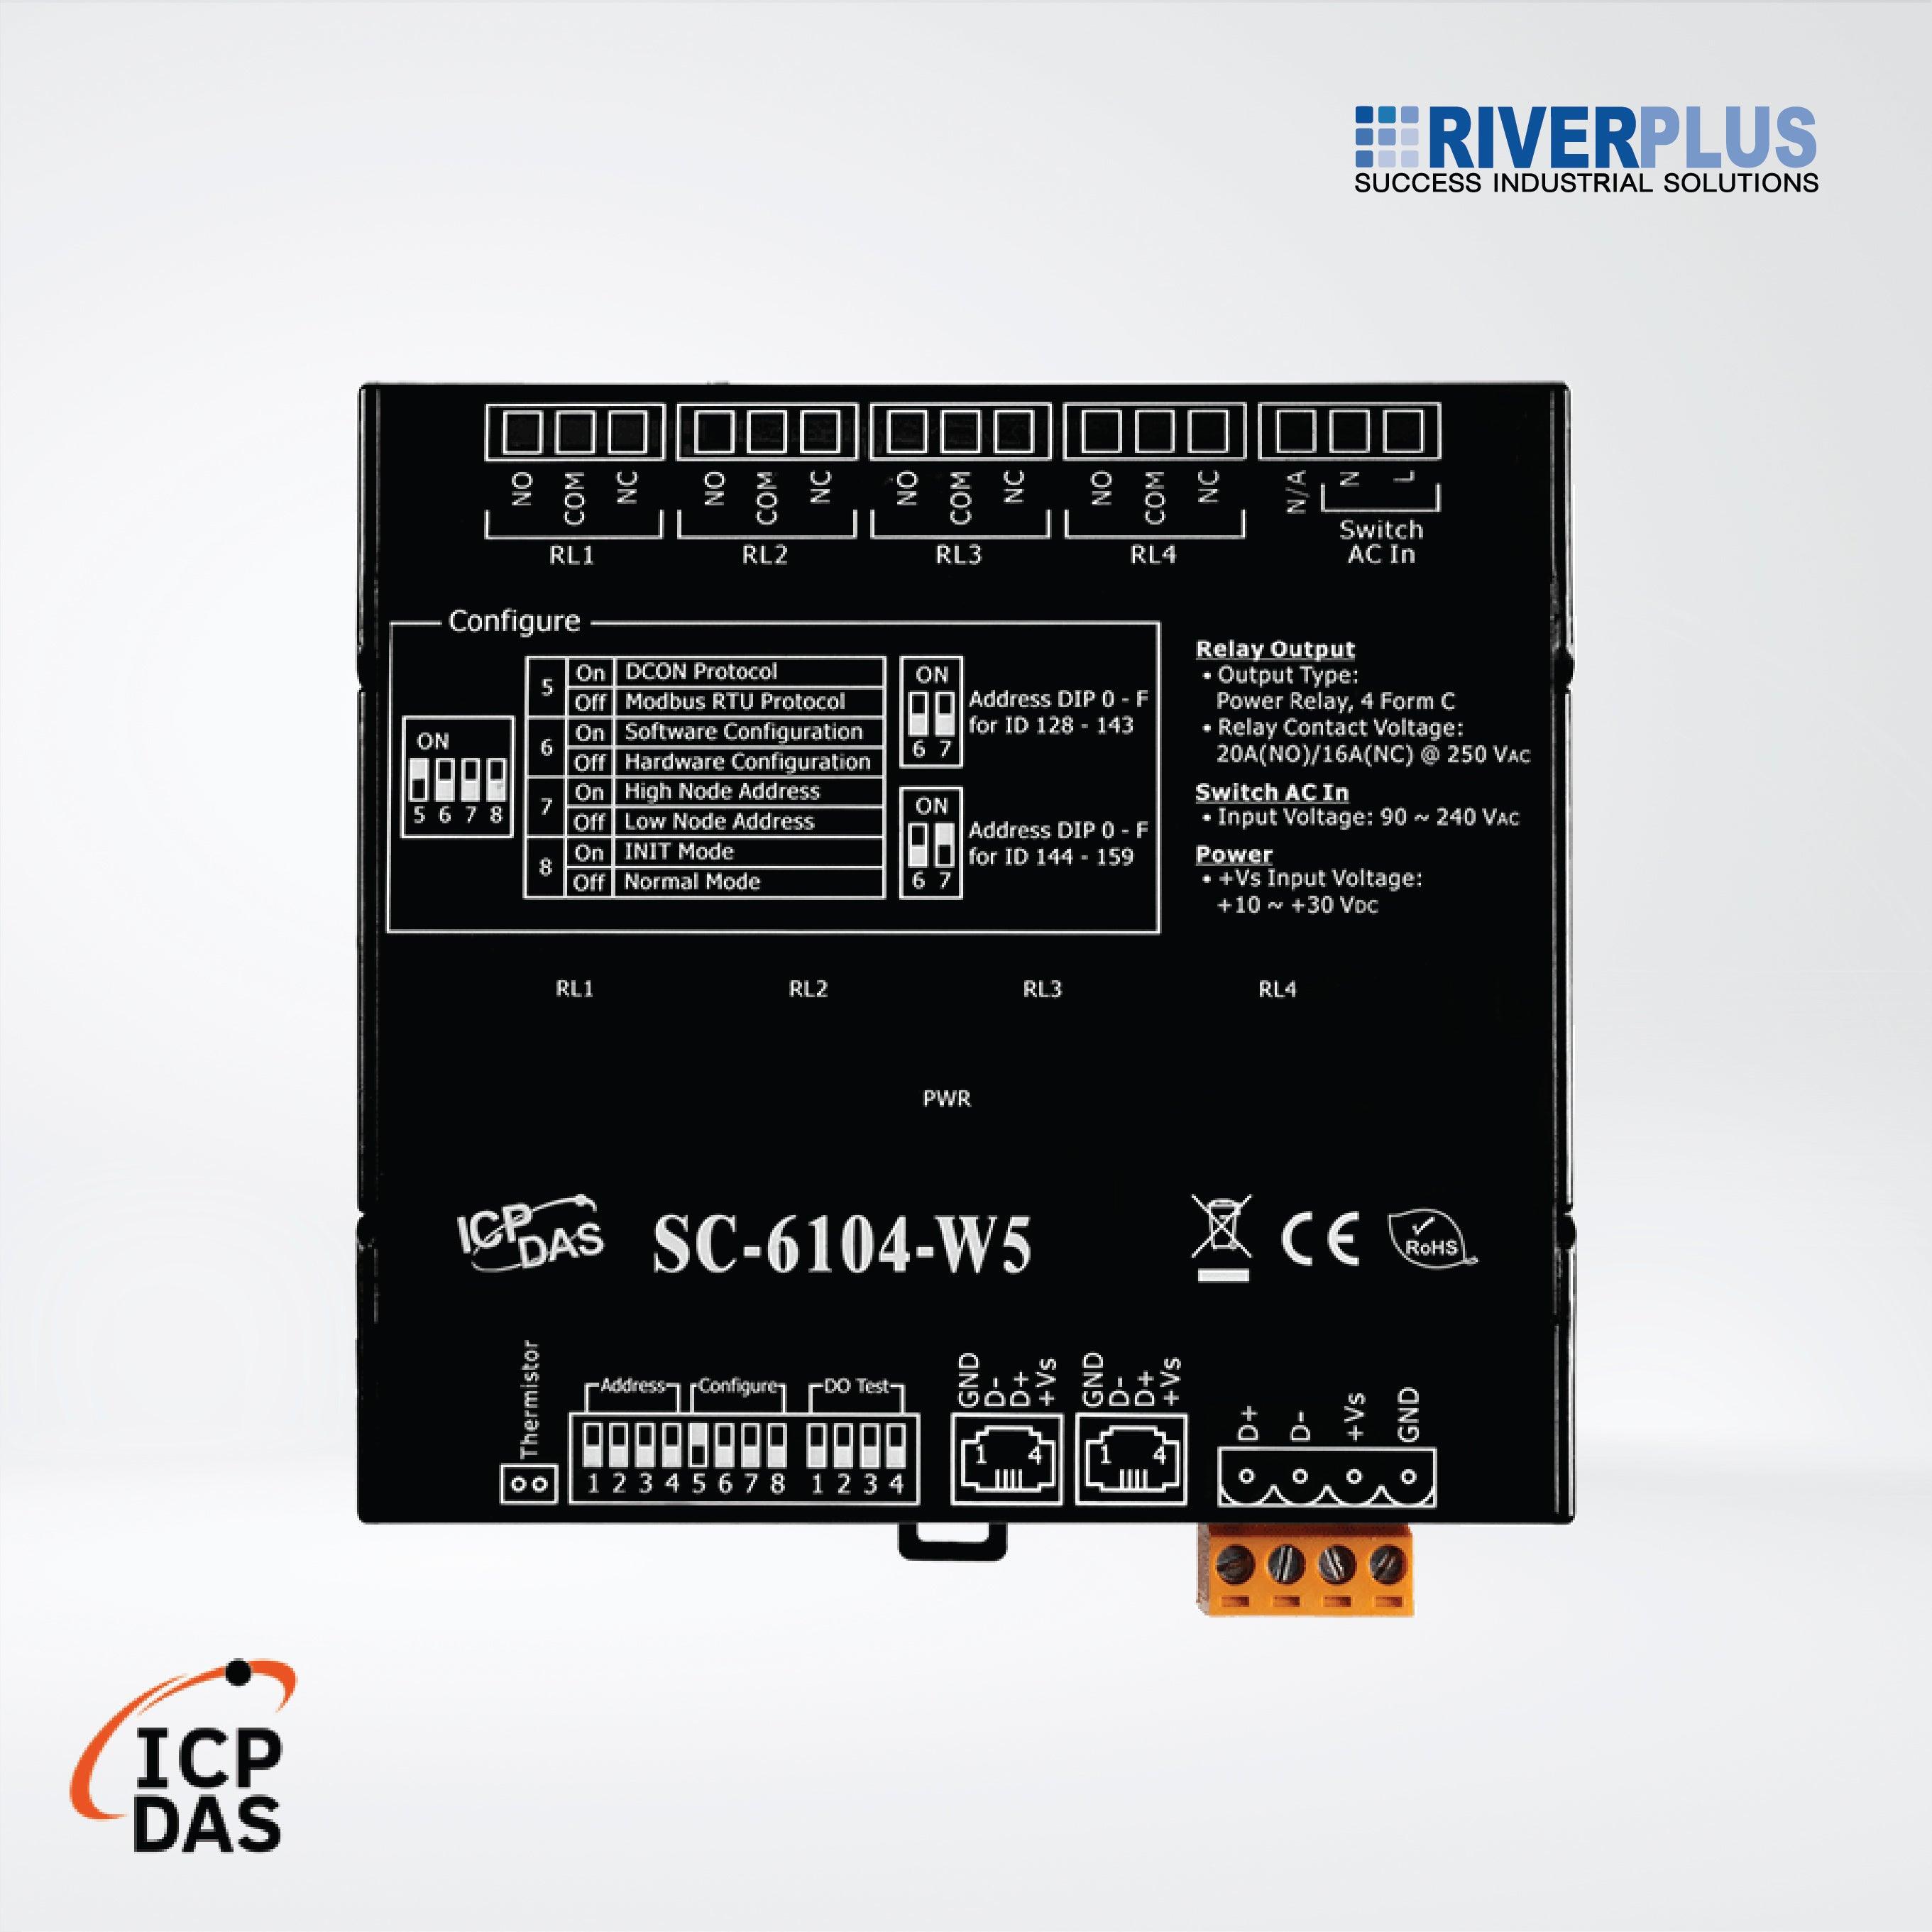 SC-6104-W5 1-channel AC Digital Input and 4-channel Relay Output Lighting Control Module - Riverplus